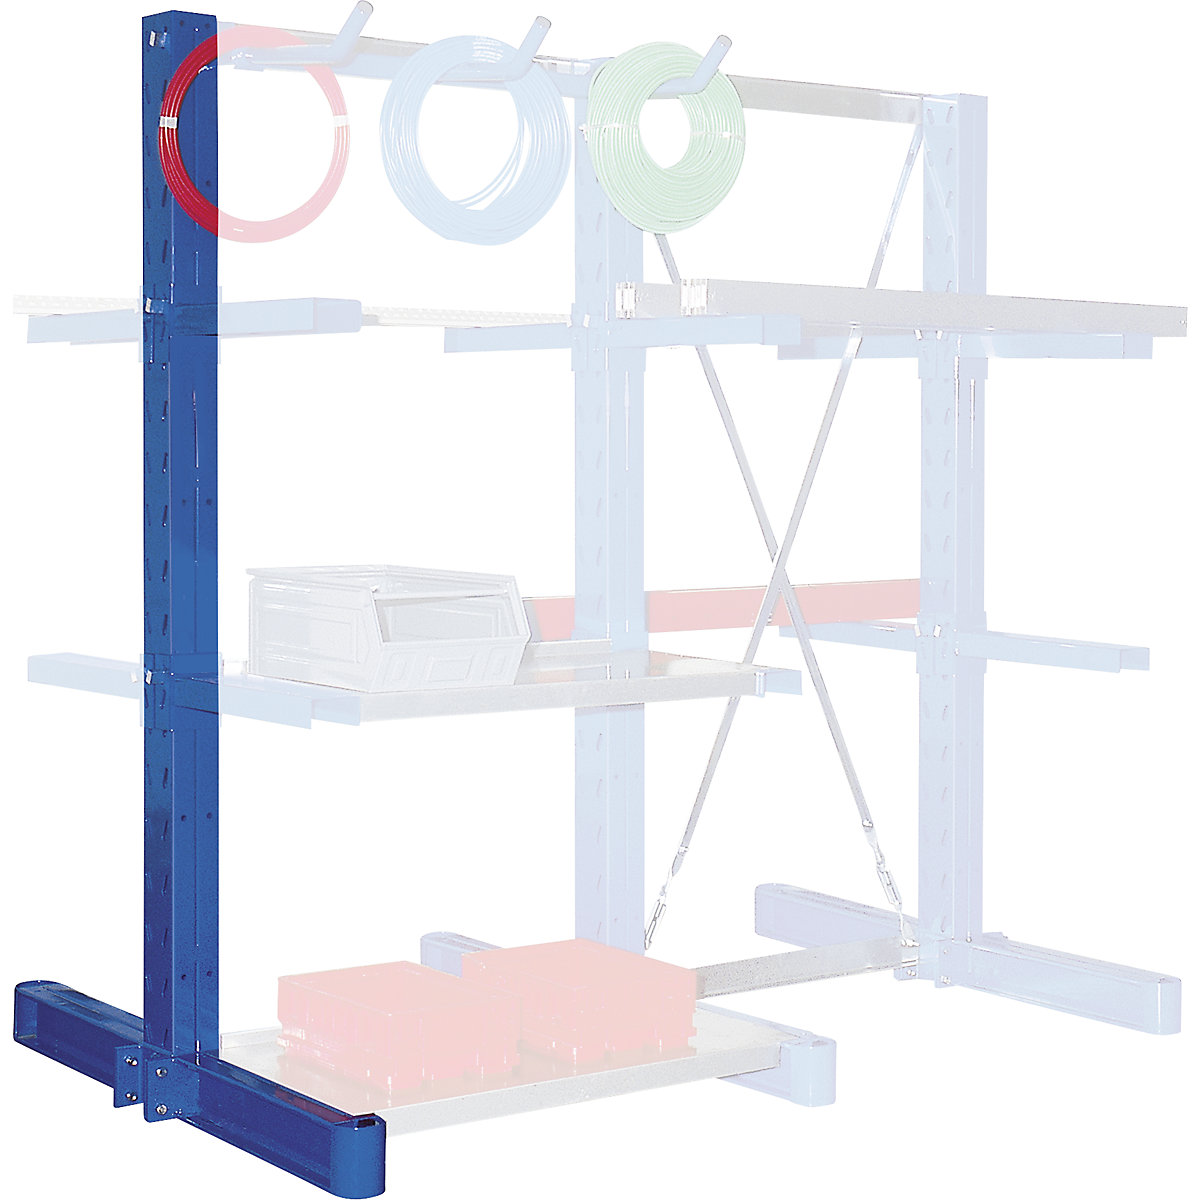 Cantilever racking upright, double sided – eurokraft pro, upright height 2100 mm, max. load 2100 kg, blue-5